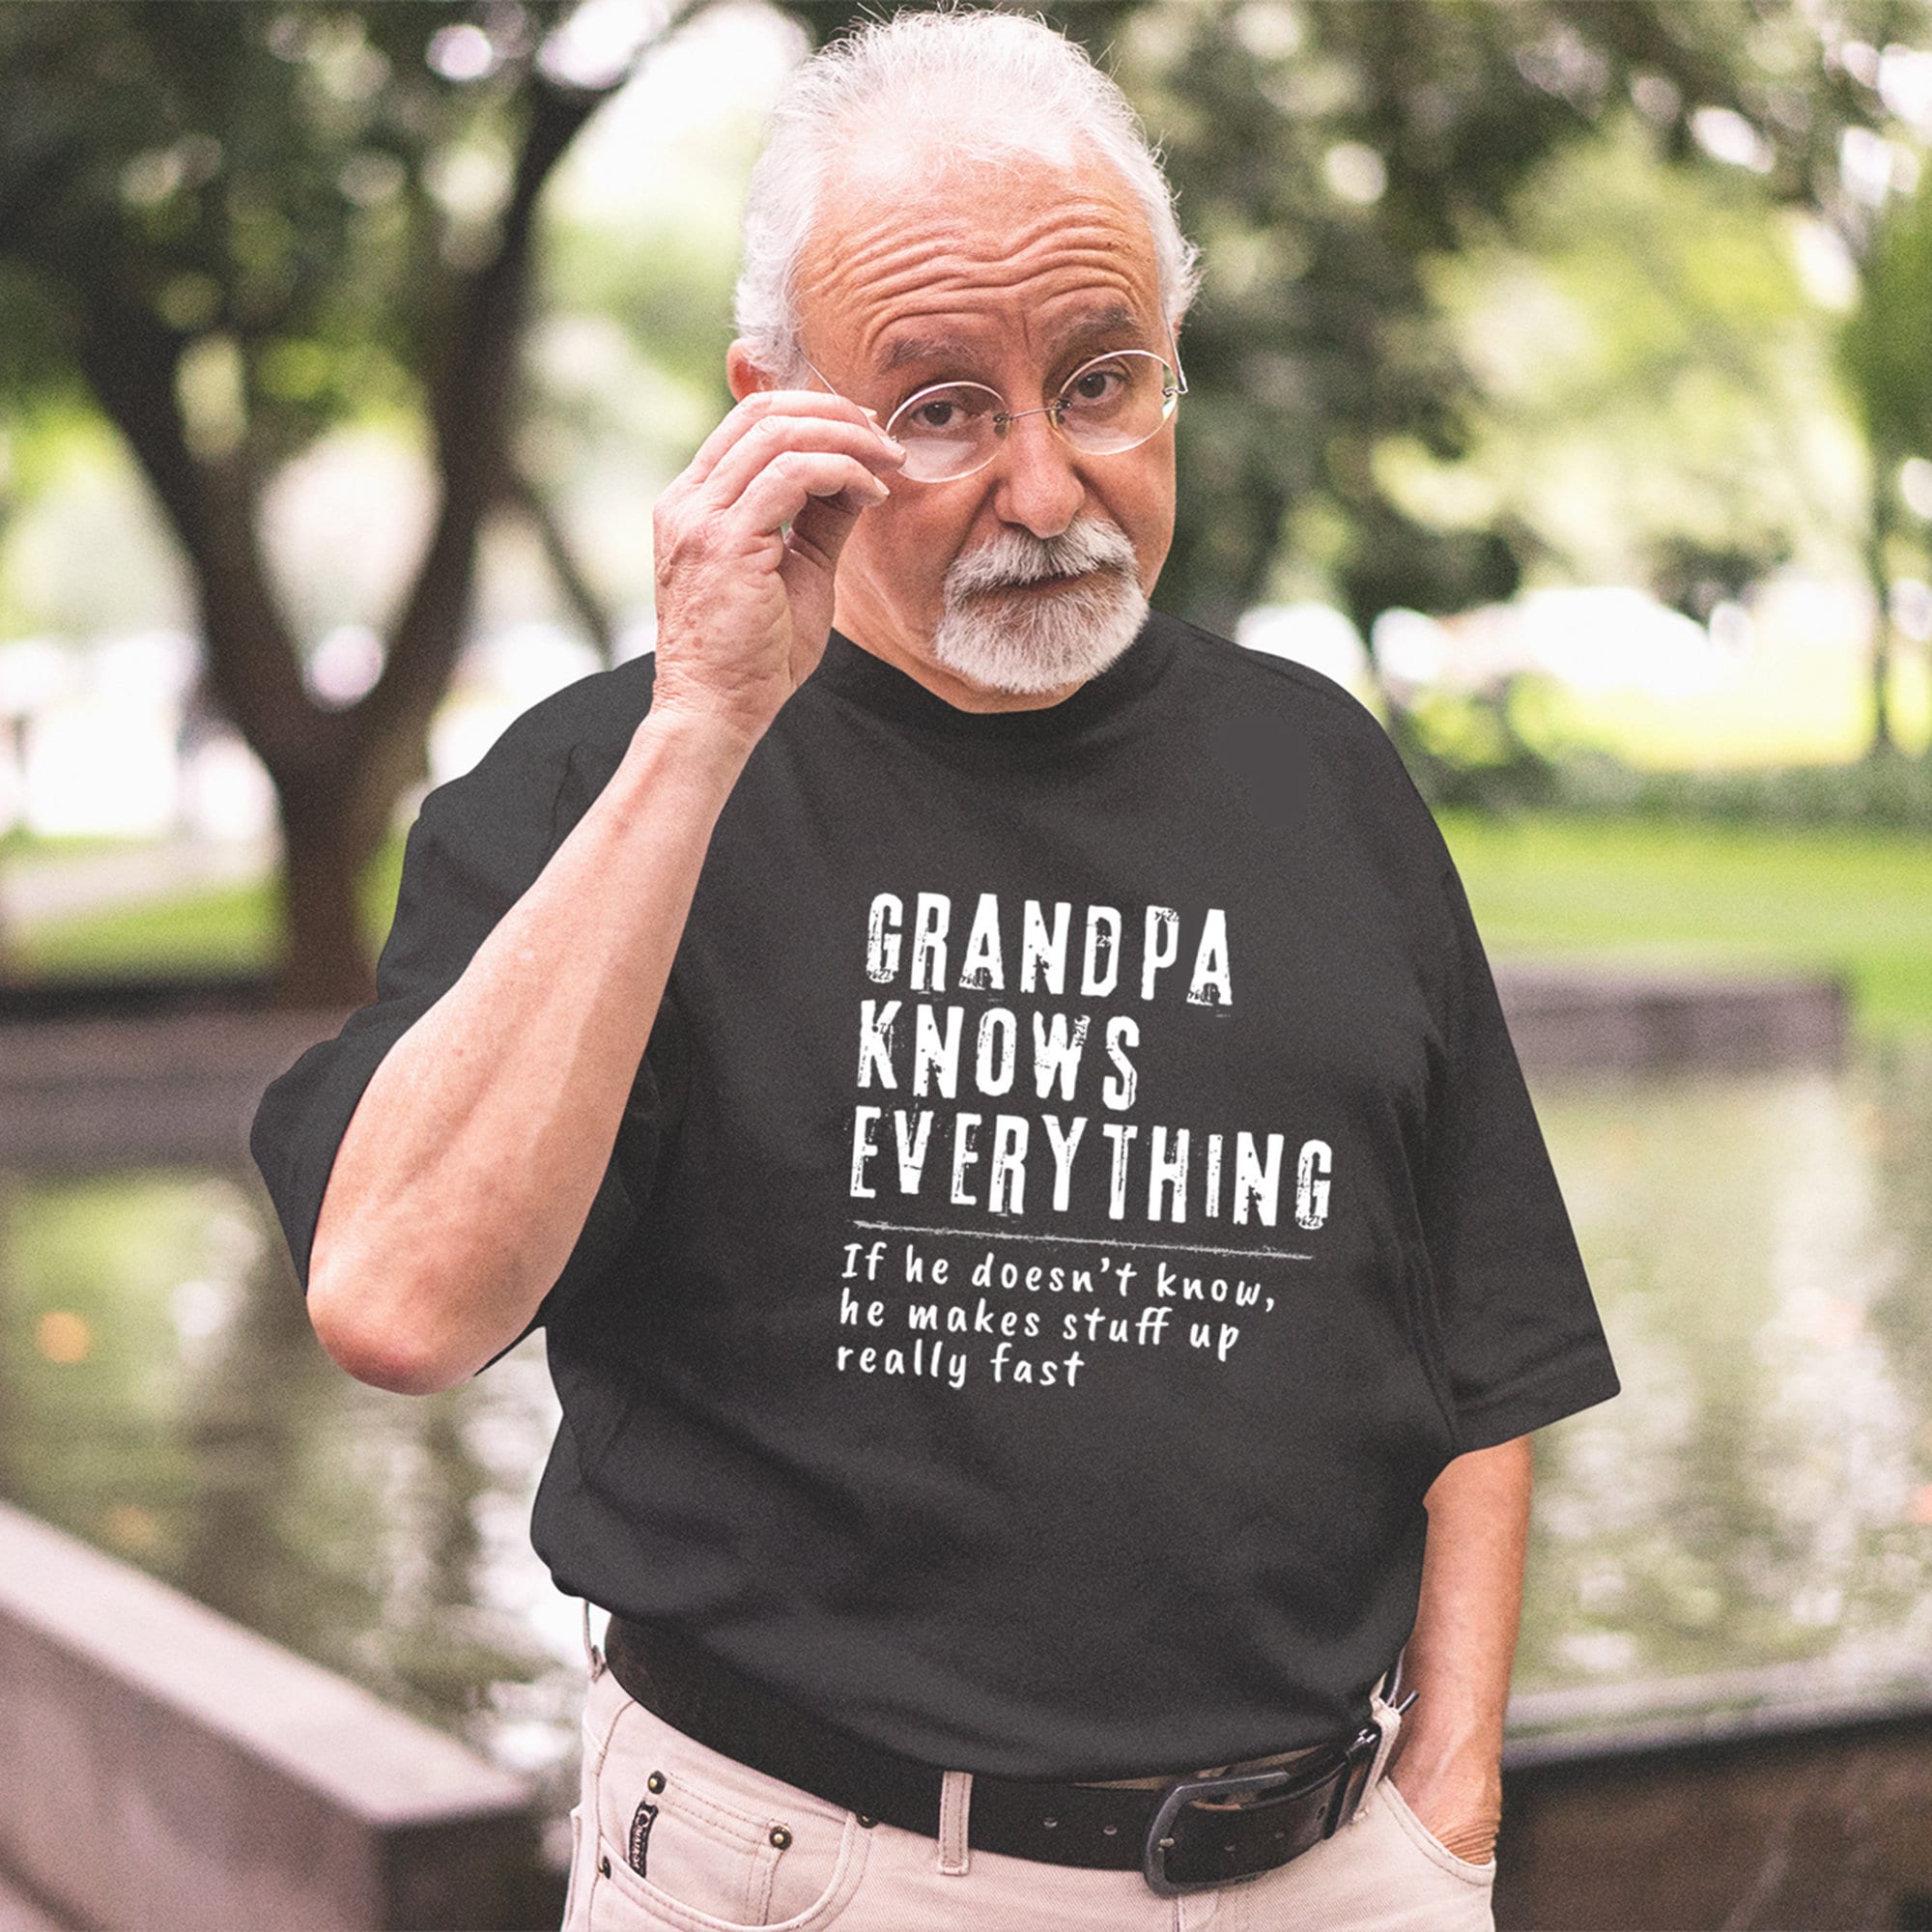 Fathers Day Shirt Grandpa Knows New Grandpa Shirt Grandad Gift Gift From Son Funny Shirt for Grandpa Gift From Daughter